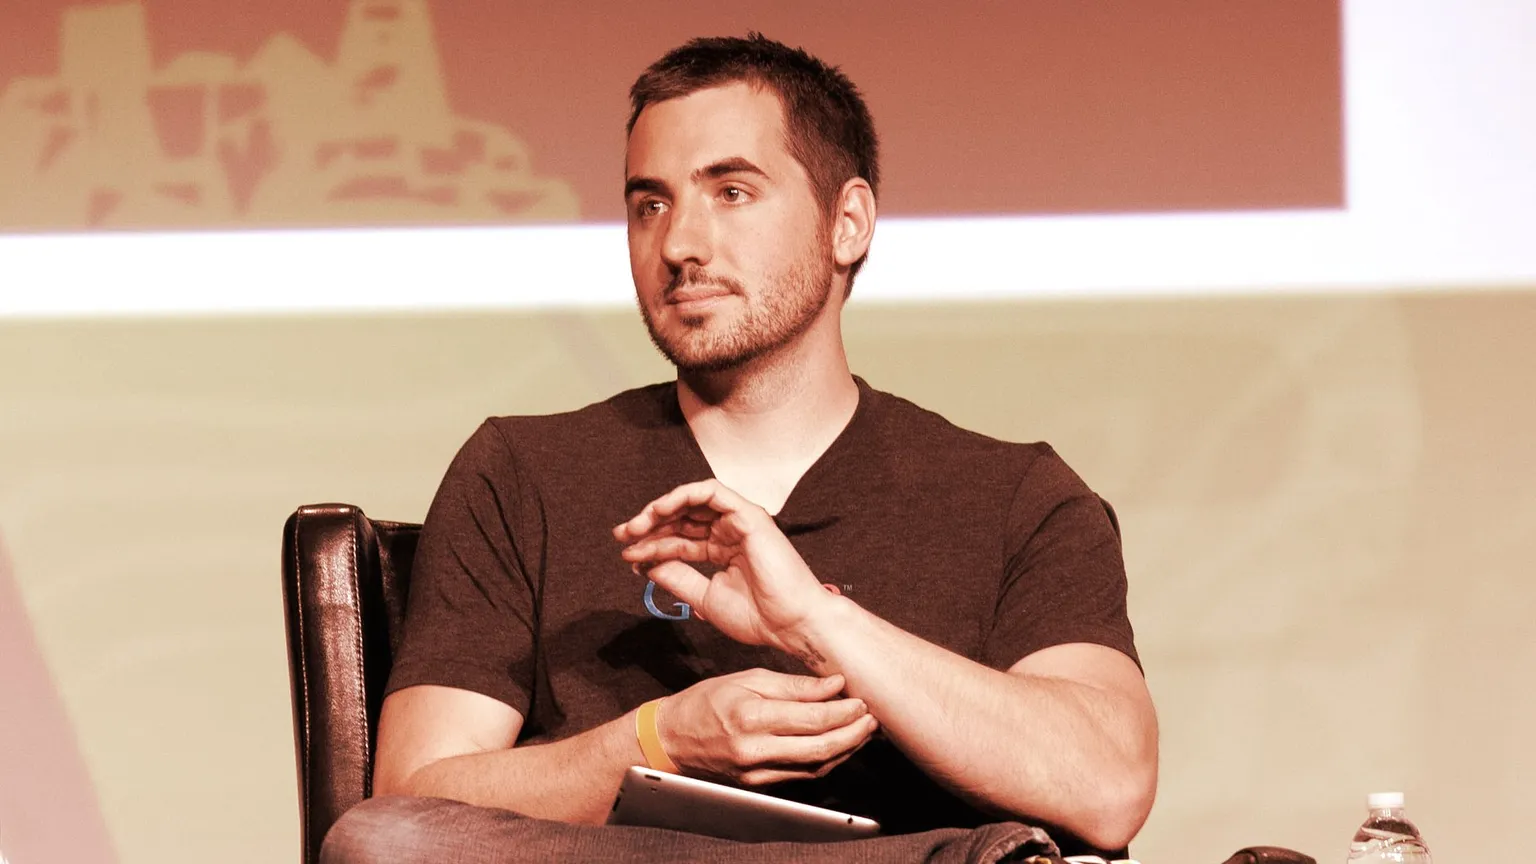 Kevin Rose in 2012. Image: Wikimedia Commons